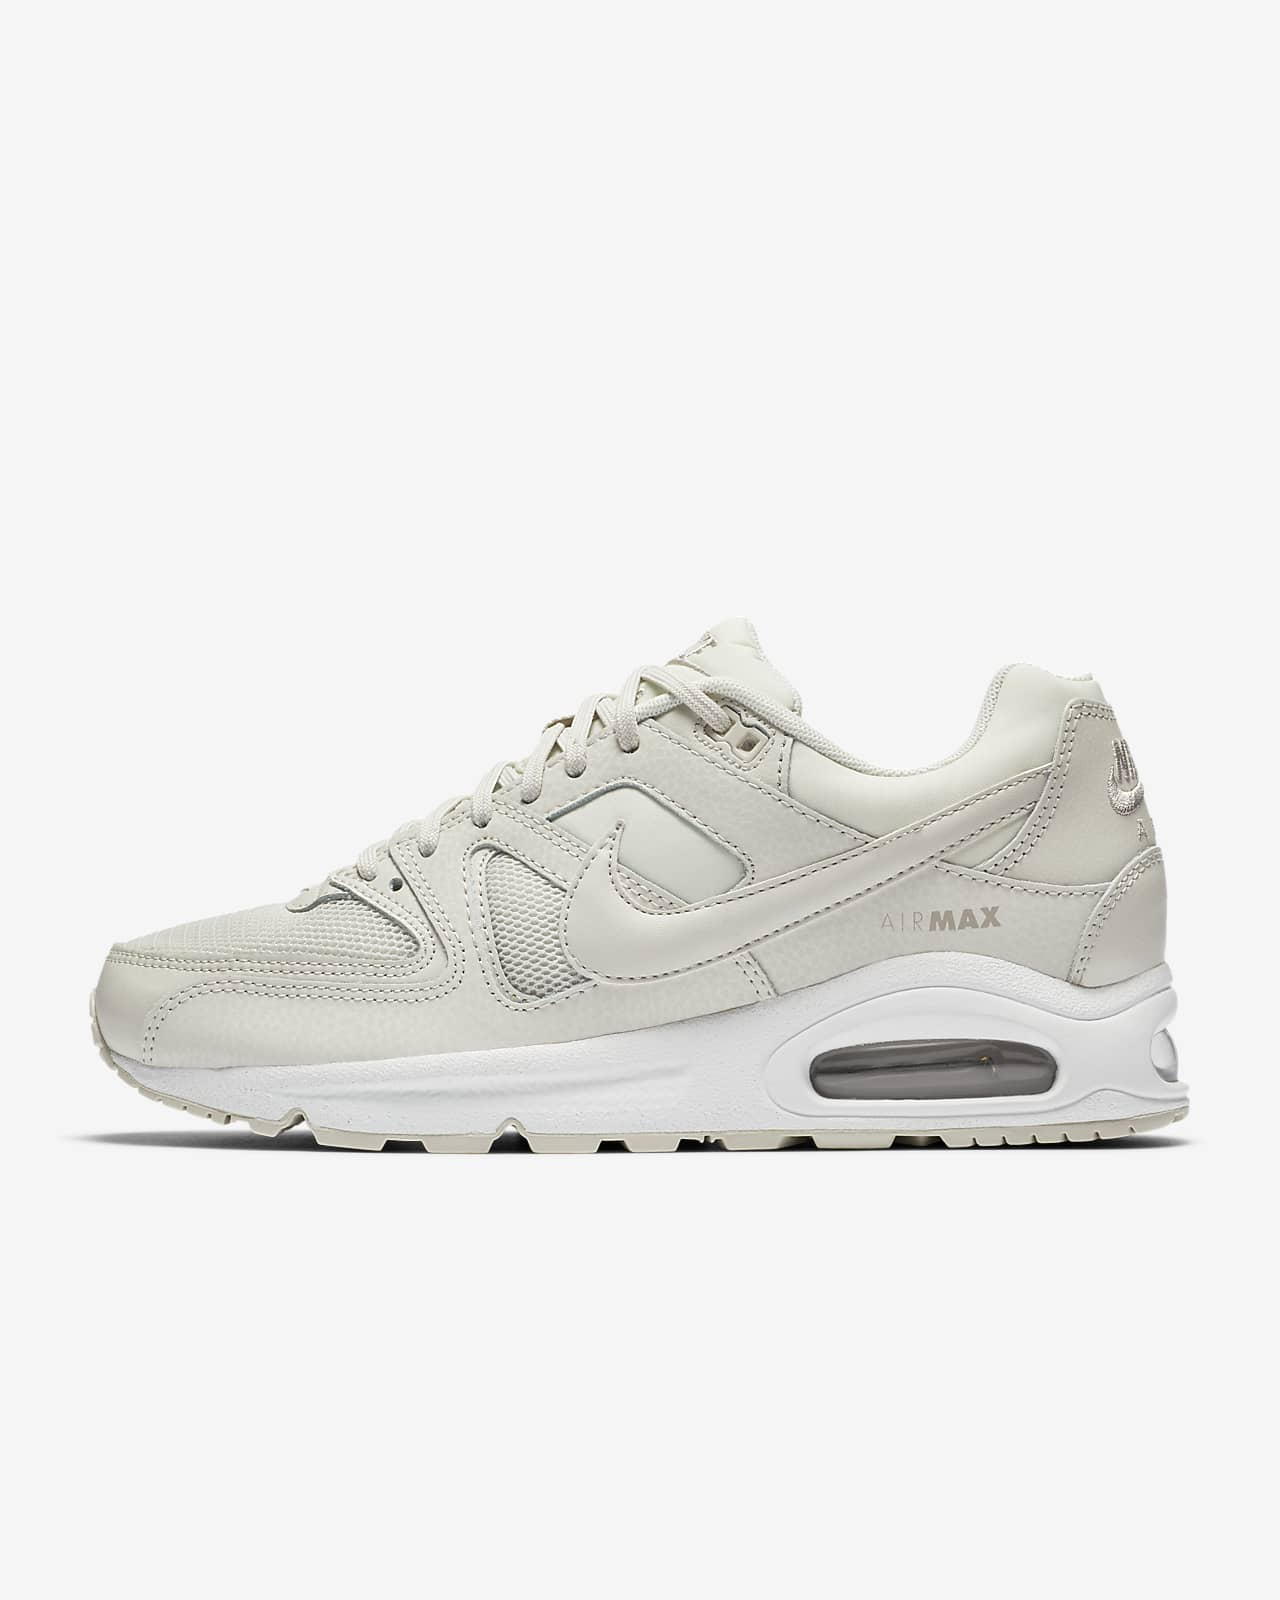 Nike Air Max Command Women's Shoes